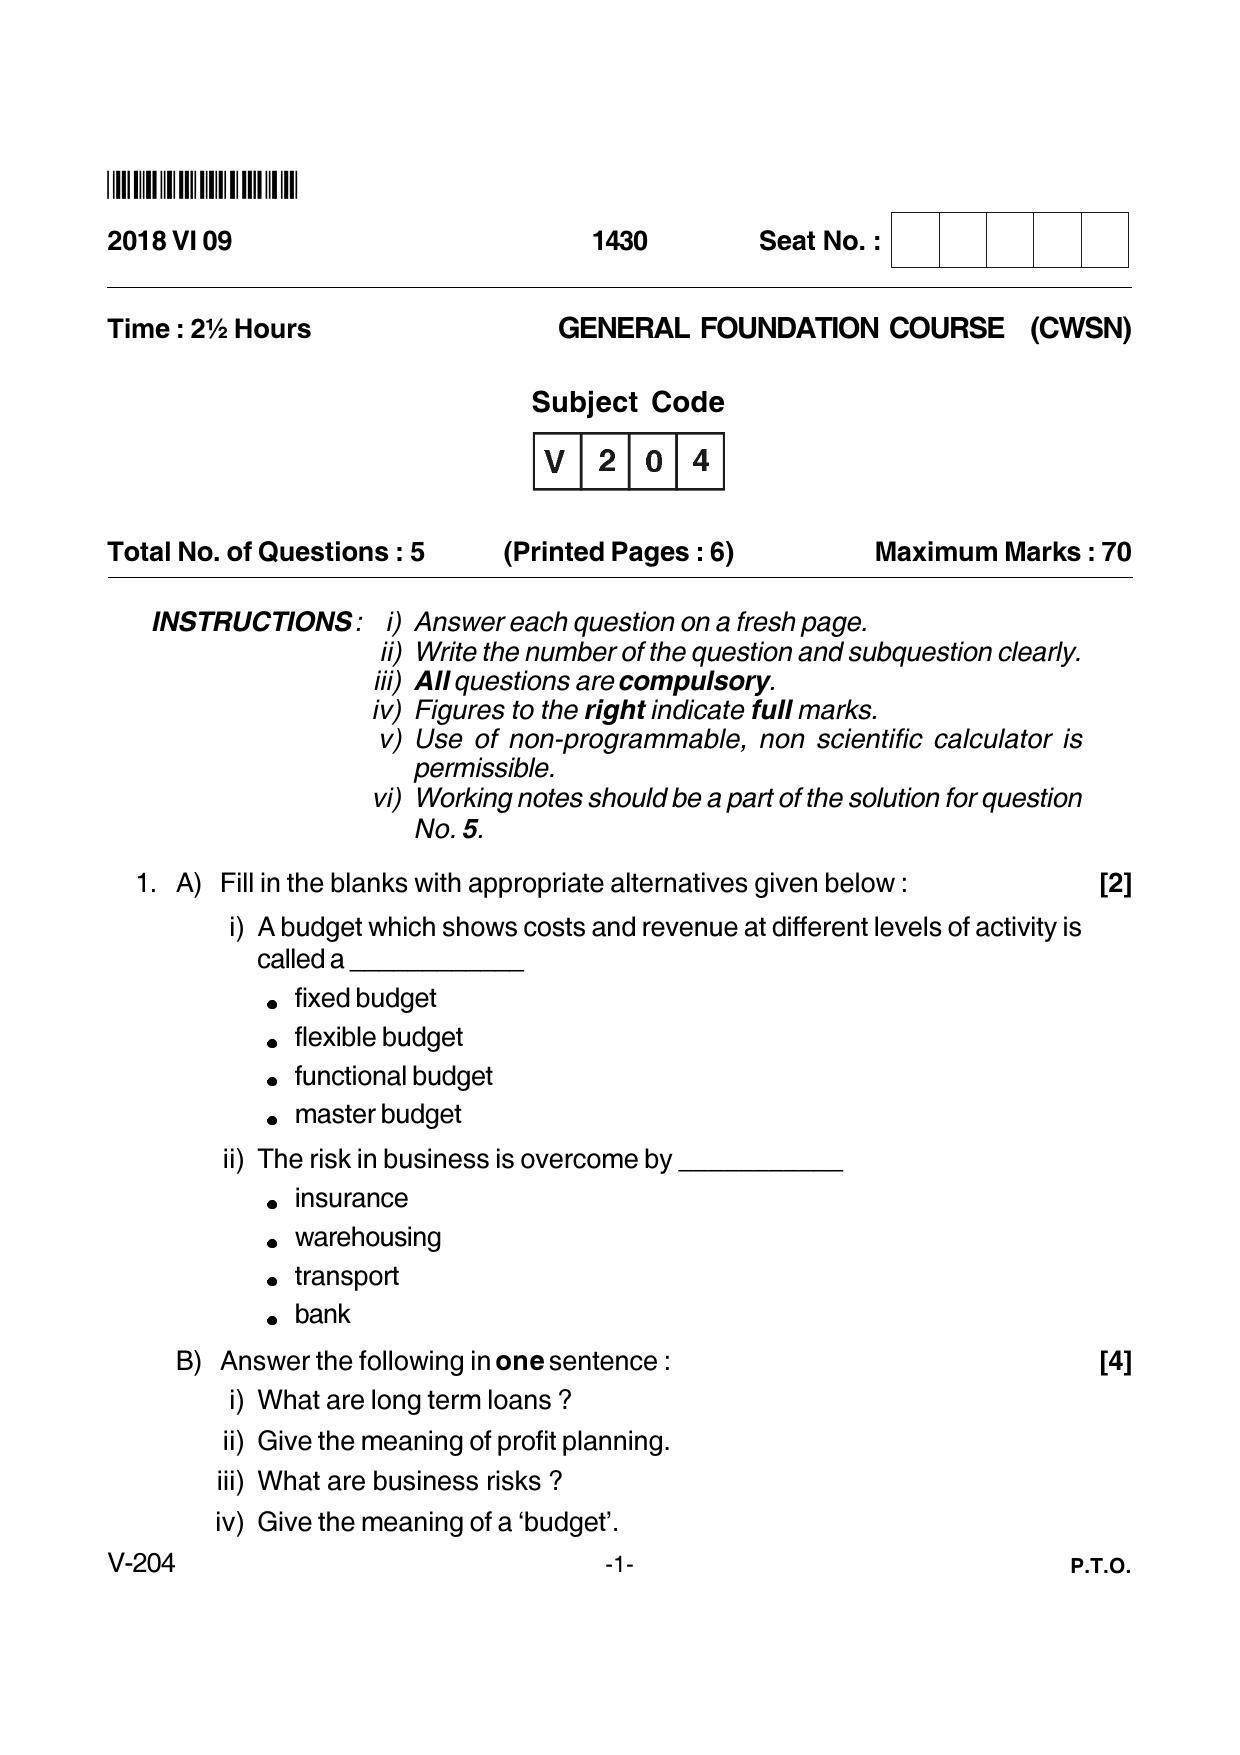 Goa Board Class 12 General Foundation Course (CWSN)  Voc 204 Cwsn (June 2018) Question Paper - Page 1